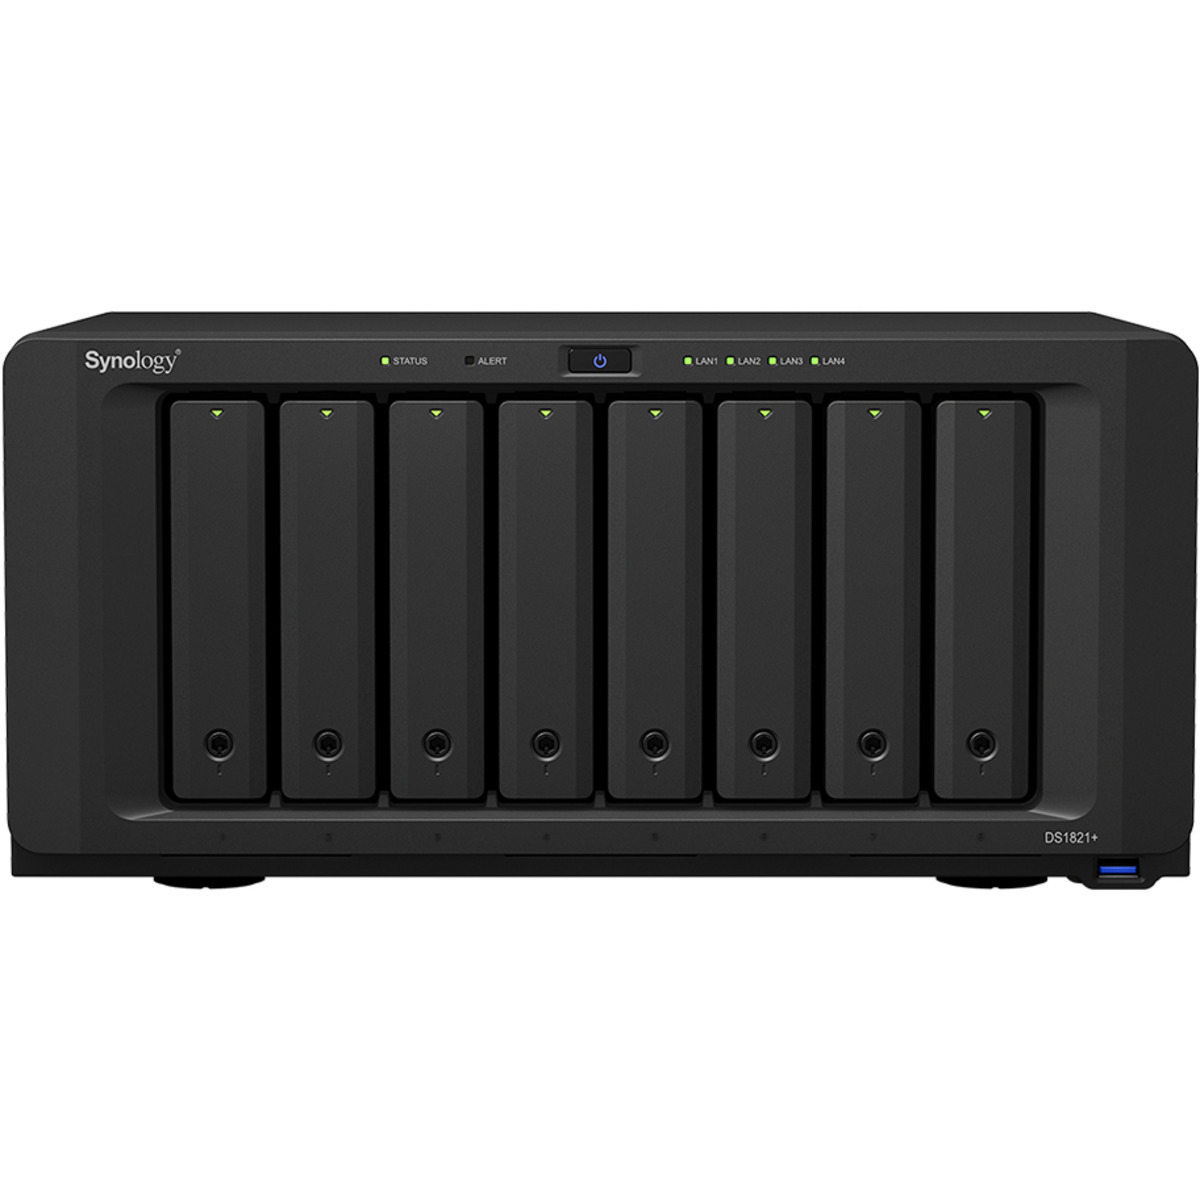 Synology DiskStation DS1821+ 48tb 8-Bay Desktop Multimedia / Power User / Business NAS - Network Attached Storage Device 4x12tb Seagate EXOS X18 ST12000NM000J 3.5 7200rpm SATA 6Gb/s HDD ENTERPRISE Class Drives Installed - Burn-In Tested - FREE RAM UPGRADE DiskStation DS1821+